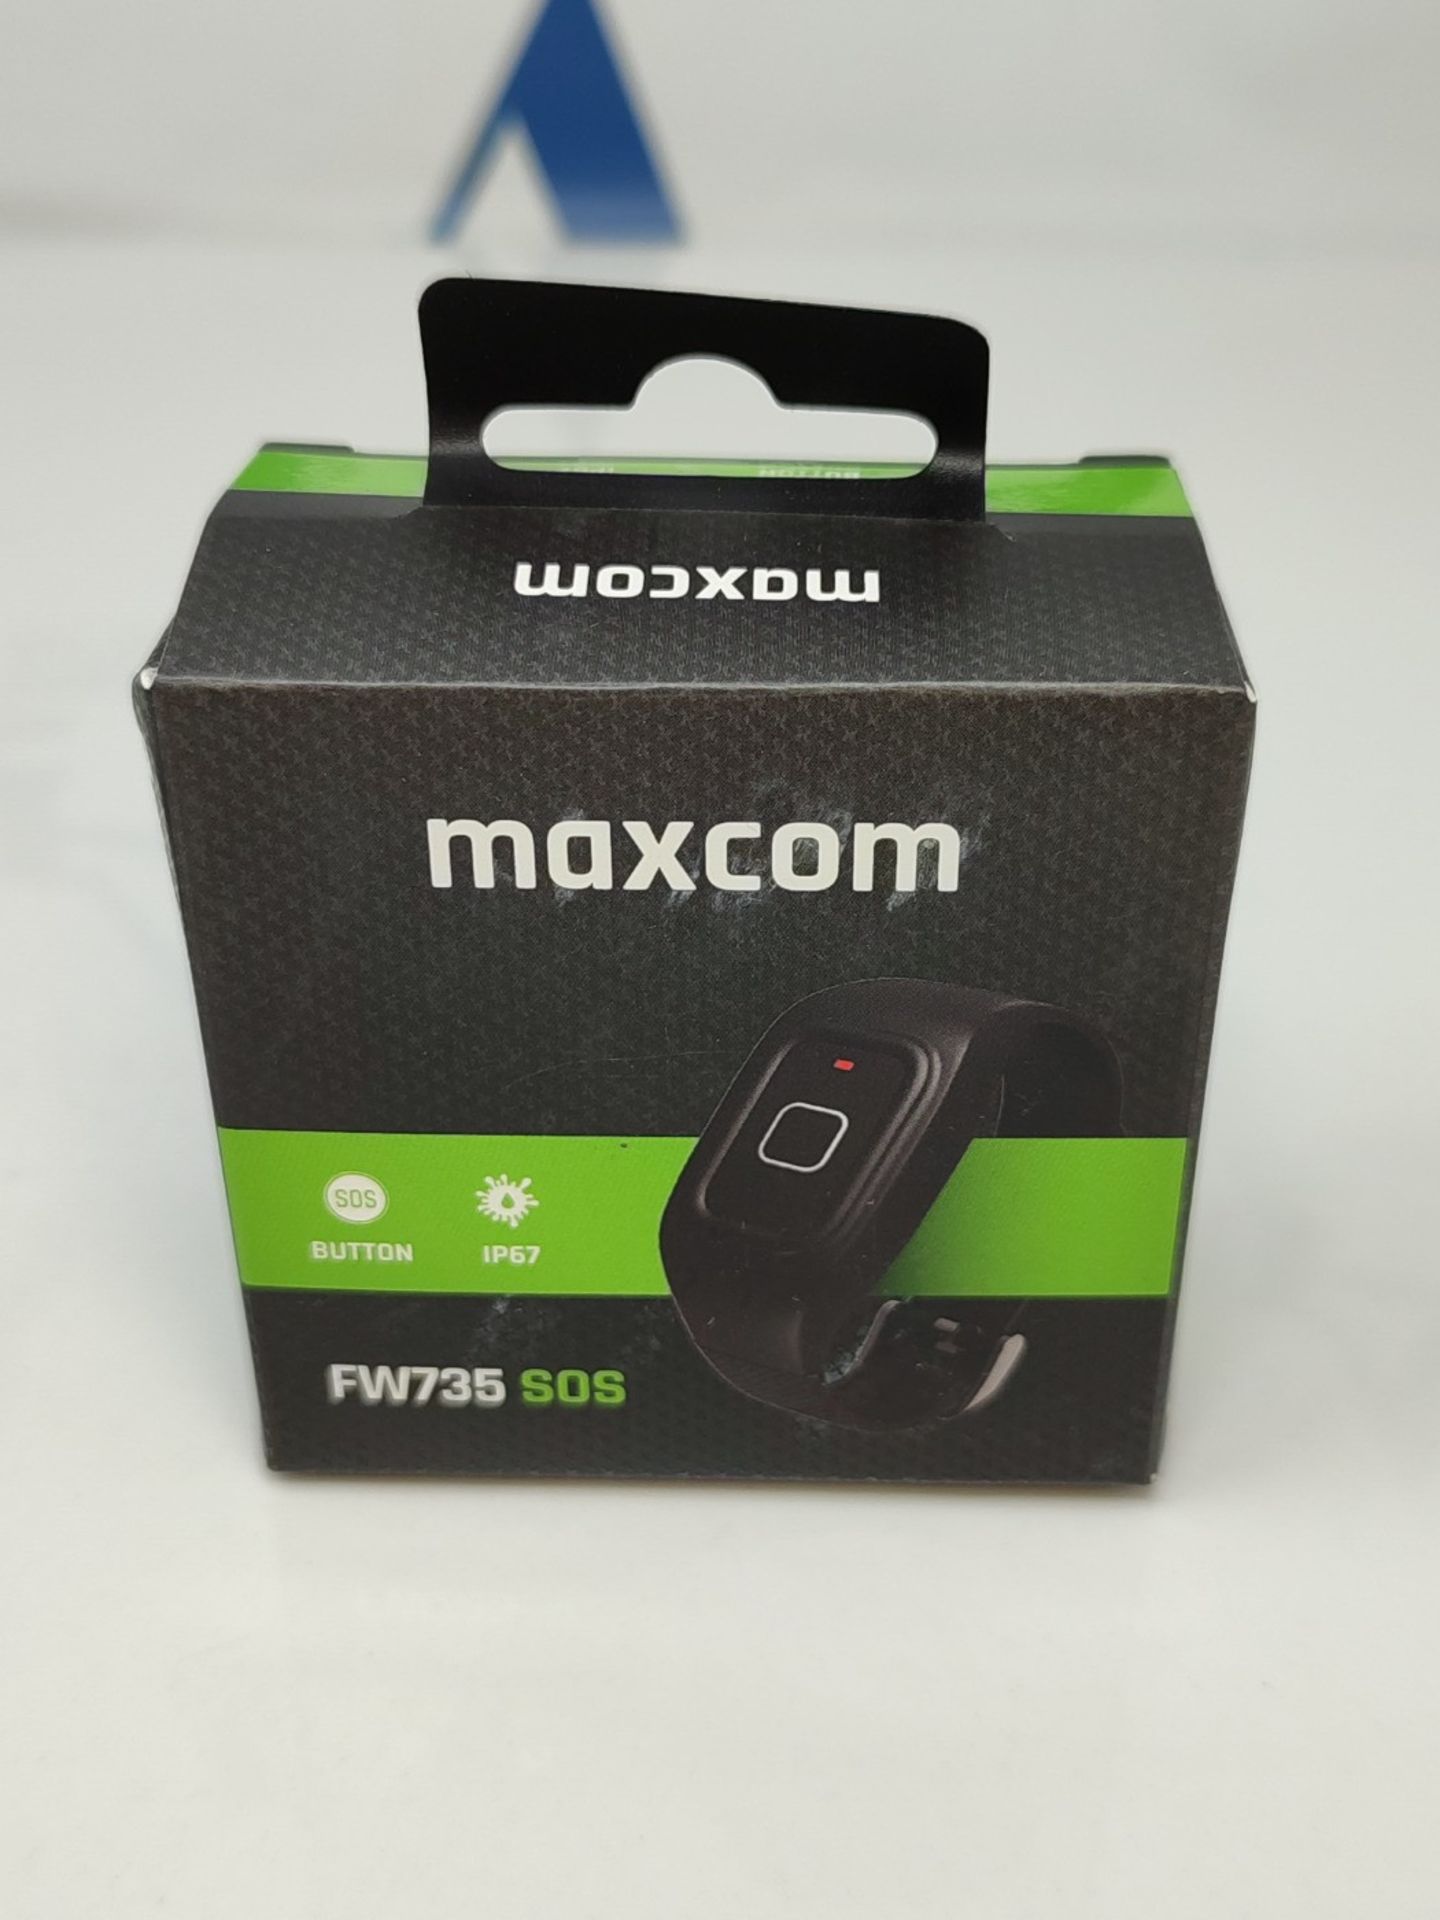 Maxcom FW735 - Emergency bracelet for older people, adults, with SOS emergency button, - Image 3 of 4